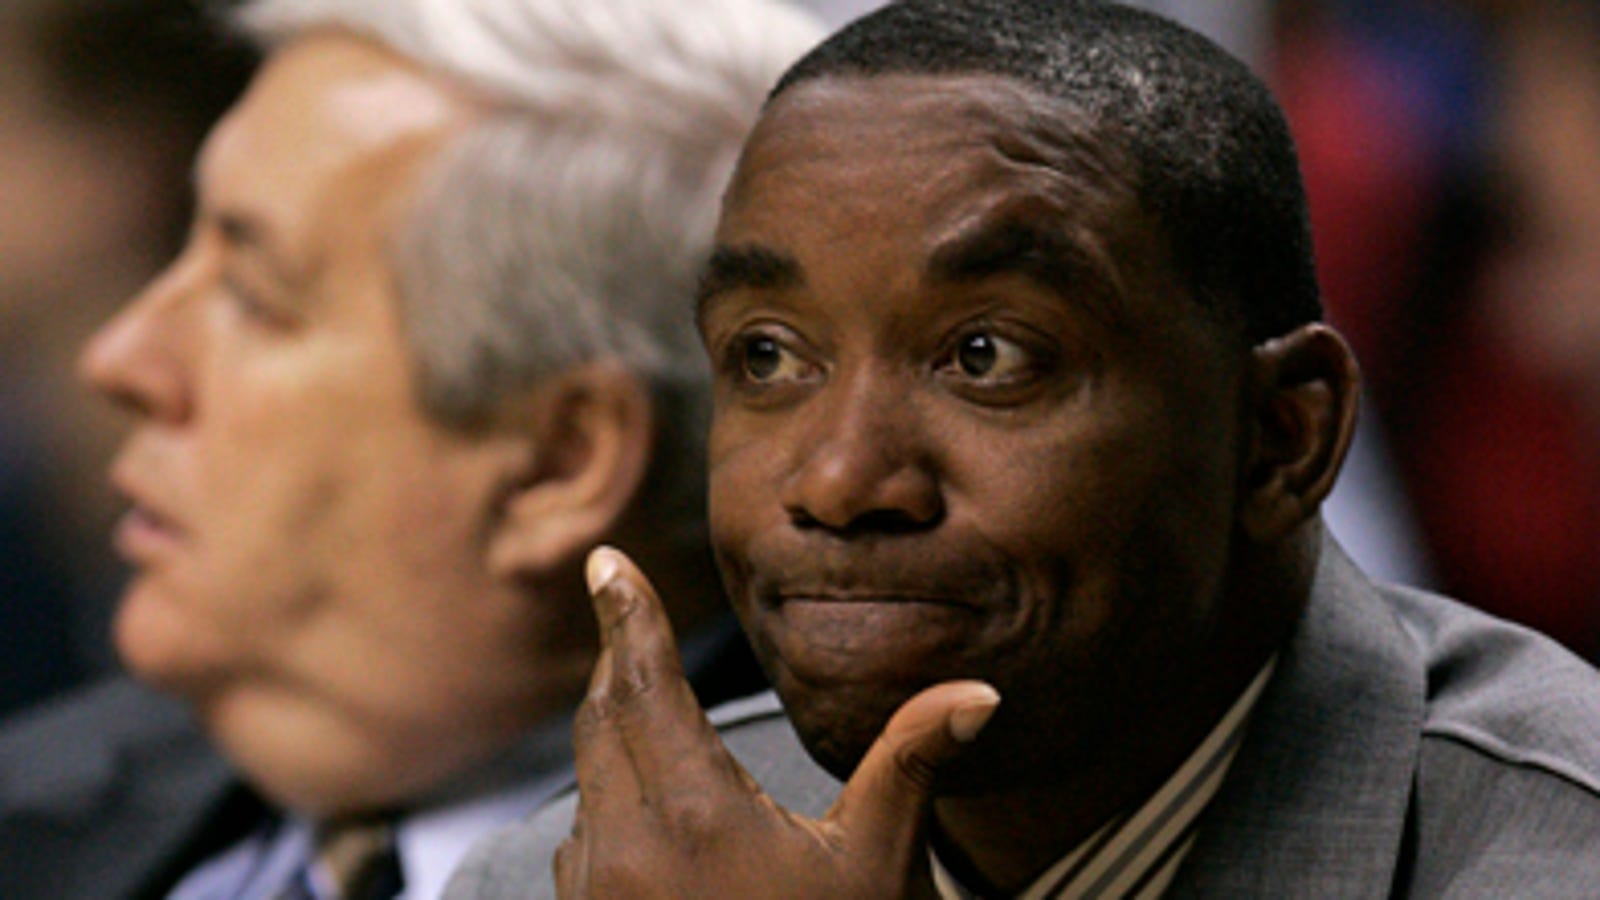 OK, We're Just Going To Say It: Isiah Thomas' Brother Peed On A Church